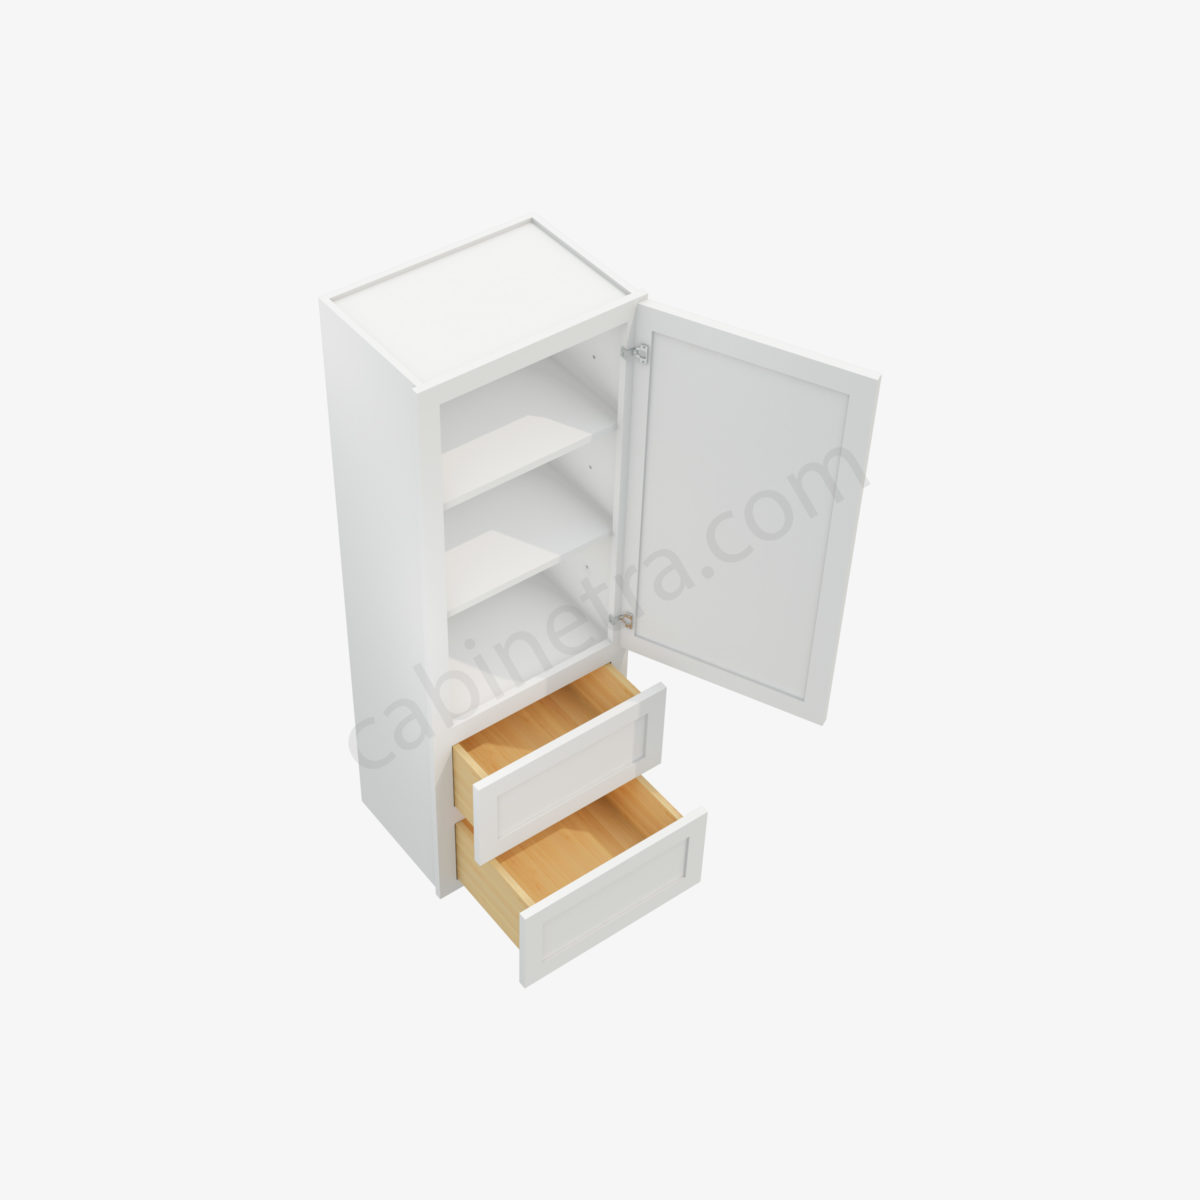 AW W2D1854 2 Forevermark Ice White Shaker Cabinetra scaled